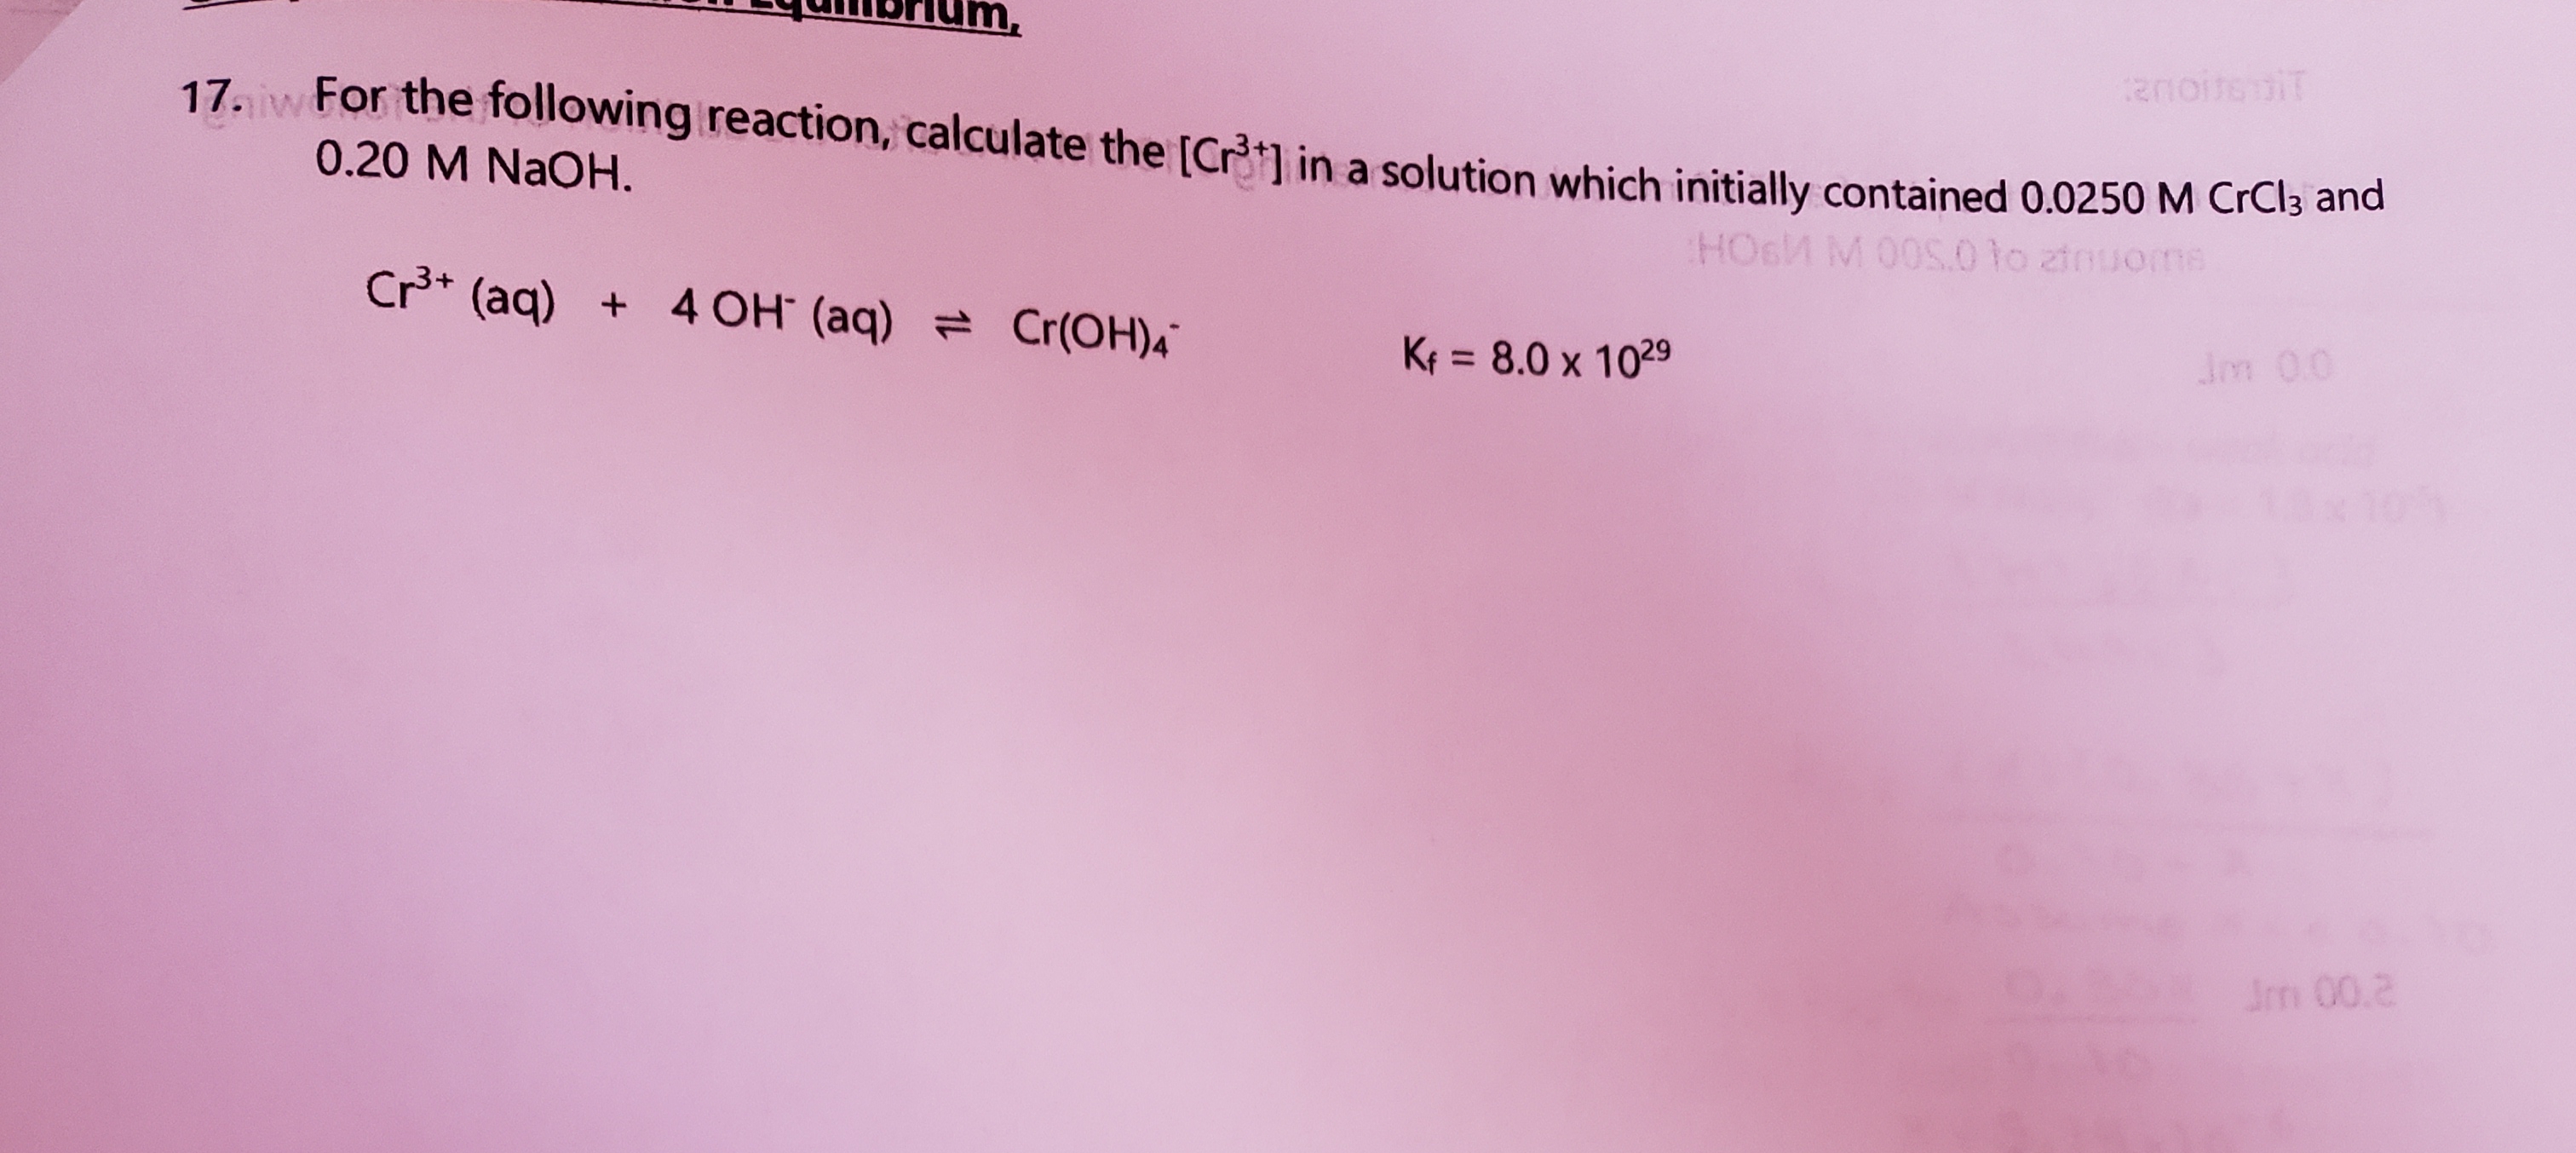 17. w For the following reaction, calculate the [Crt1 in a solution which initially contained 0.0250 M CrCi3 an
0.20 M NaOH.
HO6M M 00S.0 lo ztnuoms
Cr* (aq) + 4 OH (aq) = Cr(OH)4
= 8.0 x 1029
Jm 00
%3D
Im 00.2
